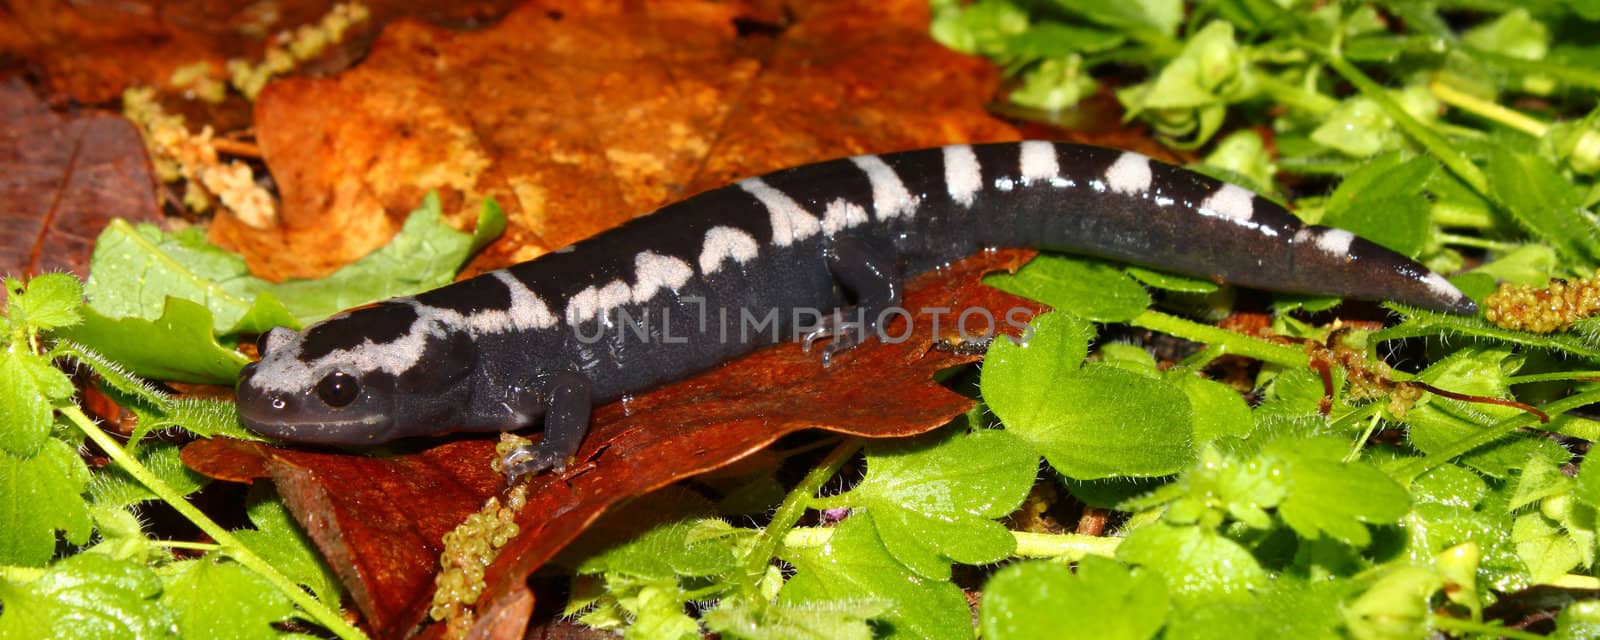 Marbled Salamander (Ambystoma opacum) by Wirepec